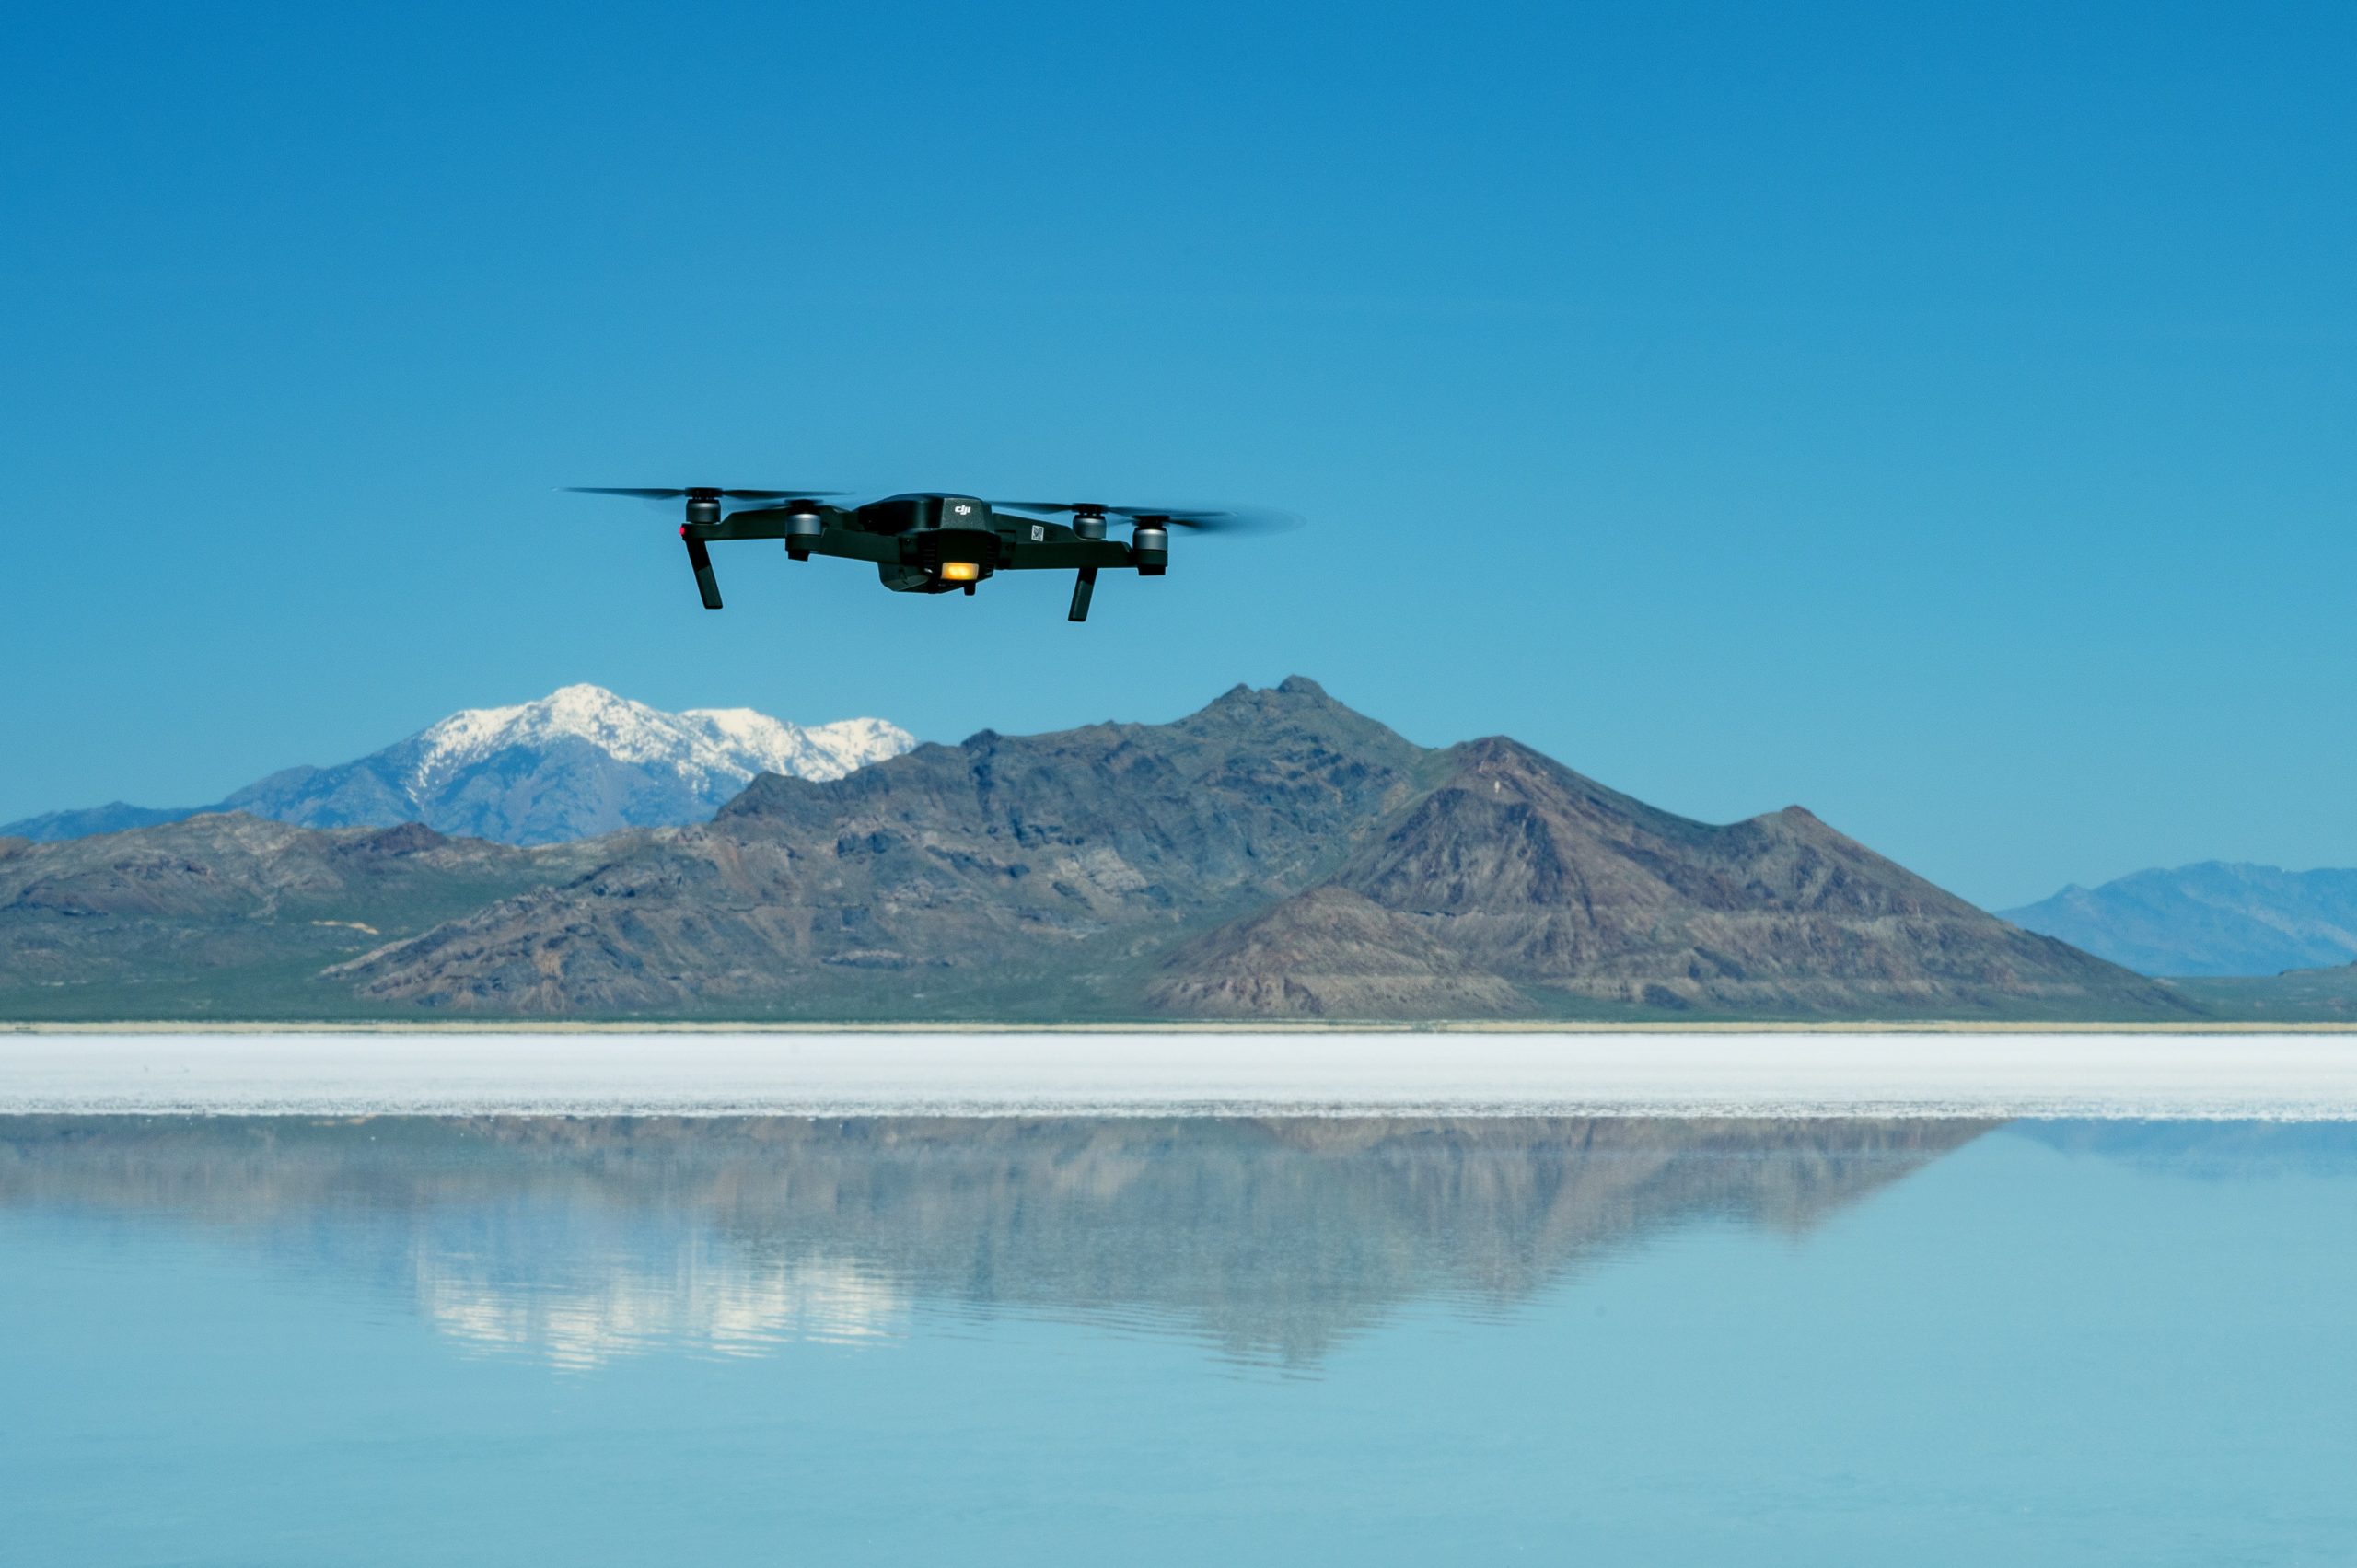 Researchers working on automating fleet of drones